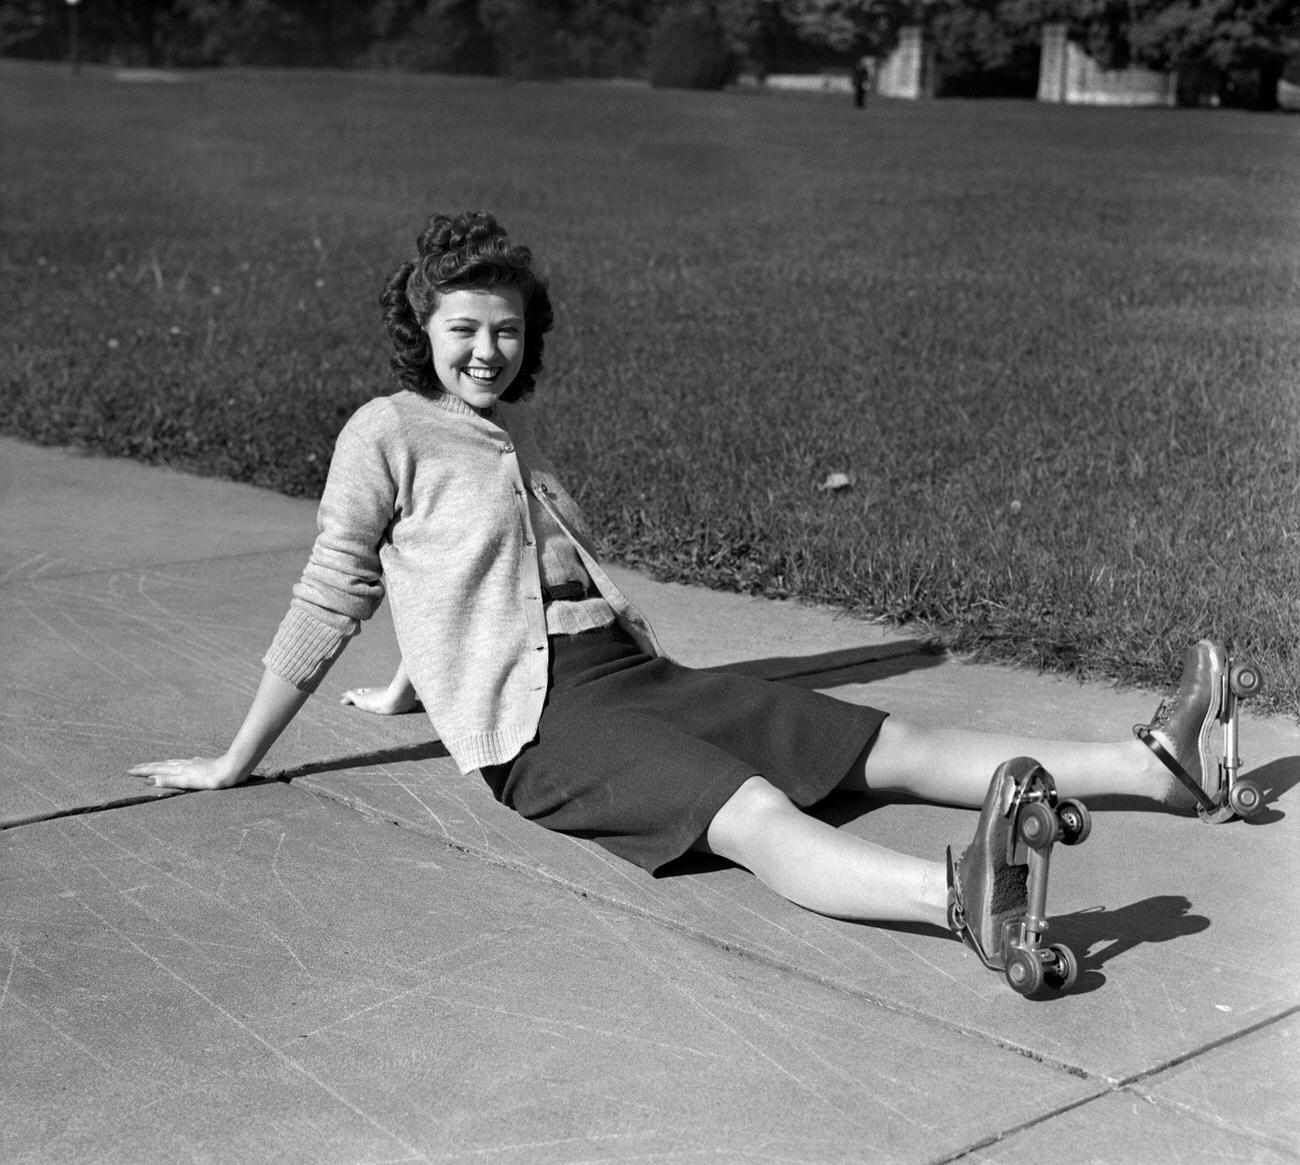 Laughing Young Woman Sitting After a Fall, 1940s.